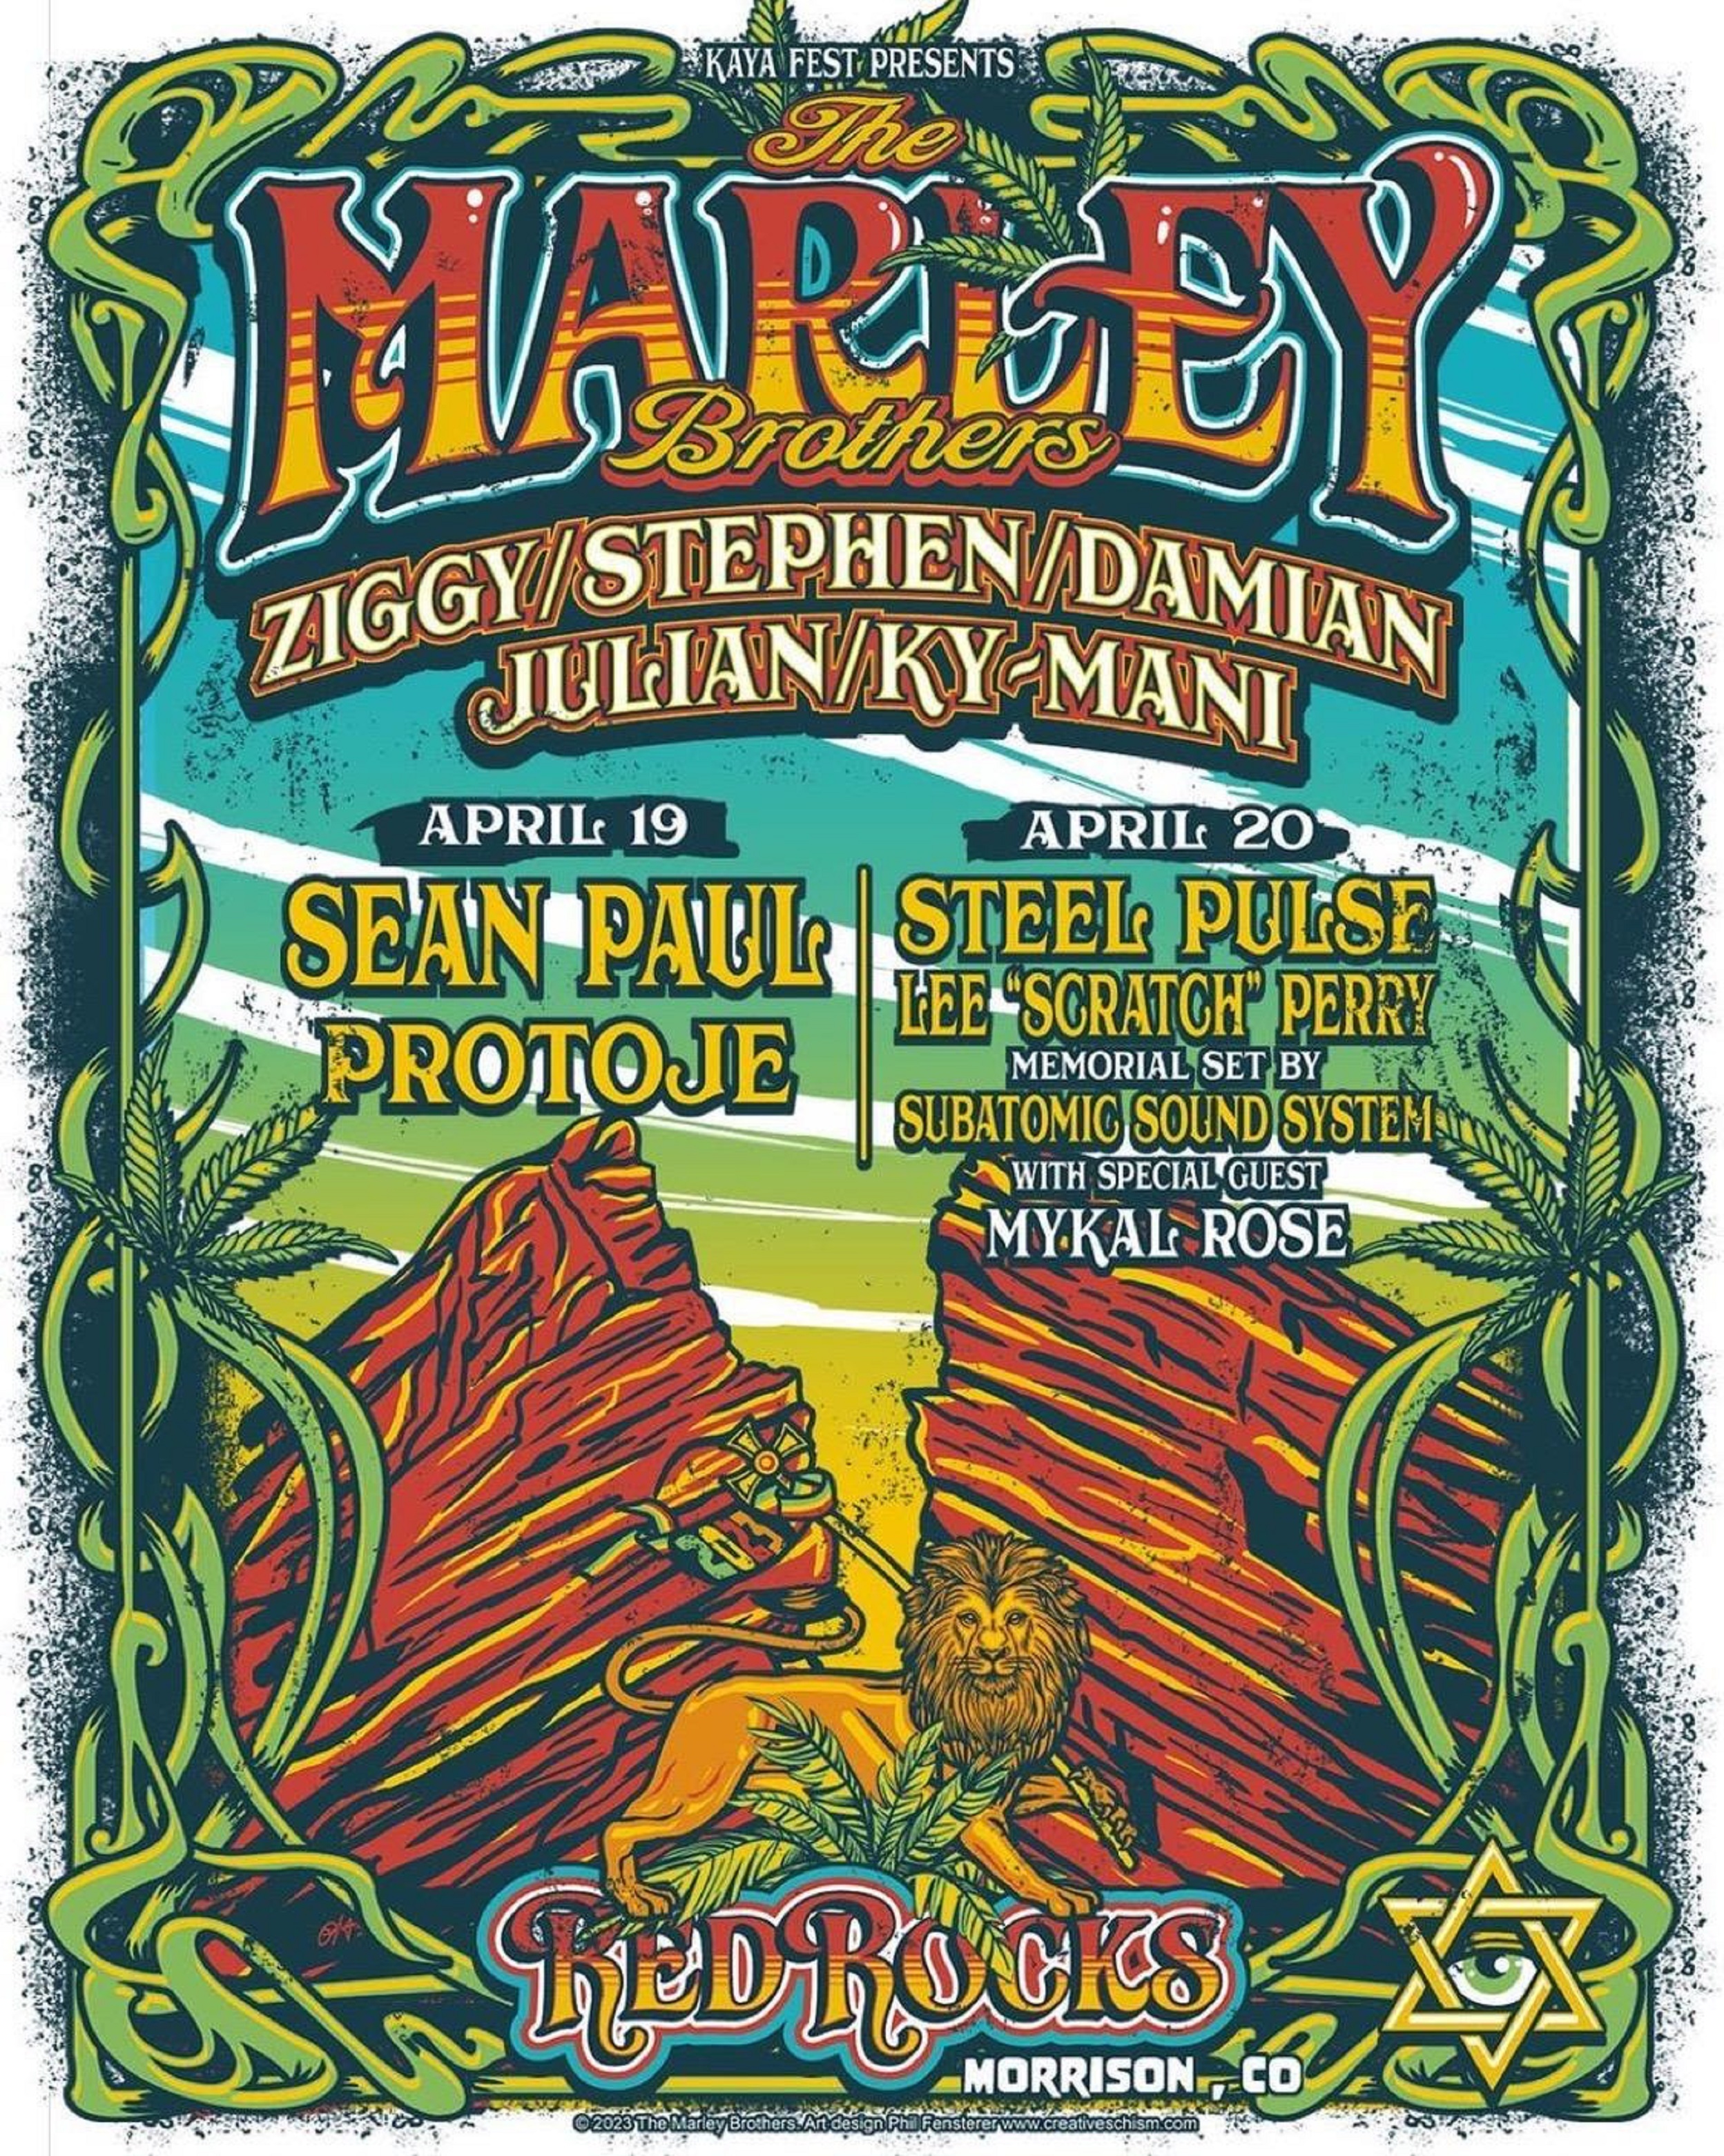 MARLEY BROTHERS 420 CELEBRATION AT RED ROCKS